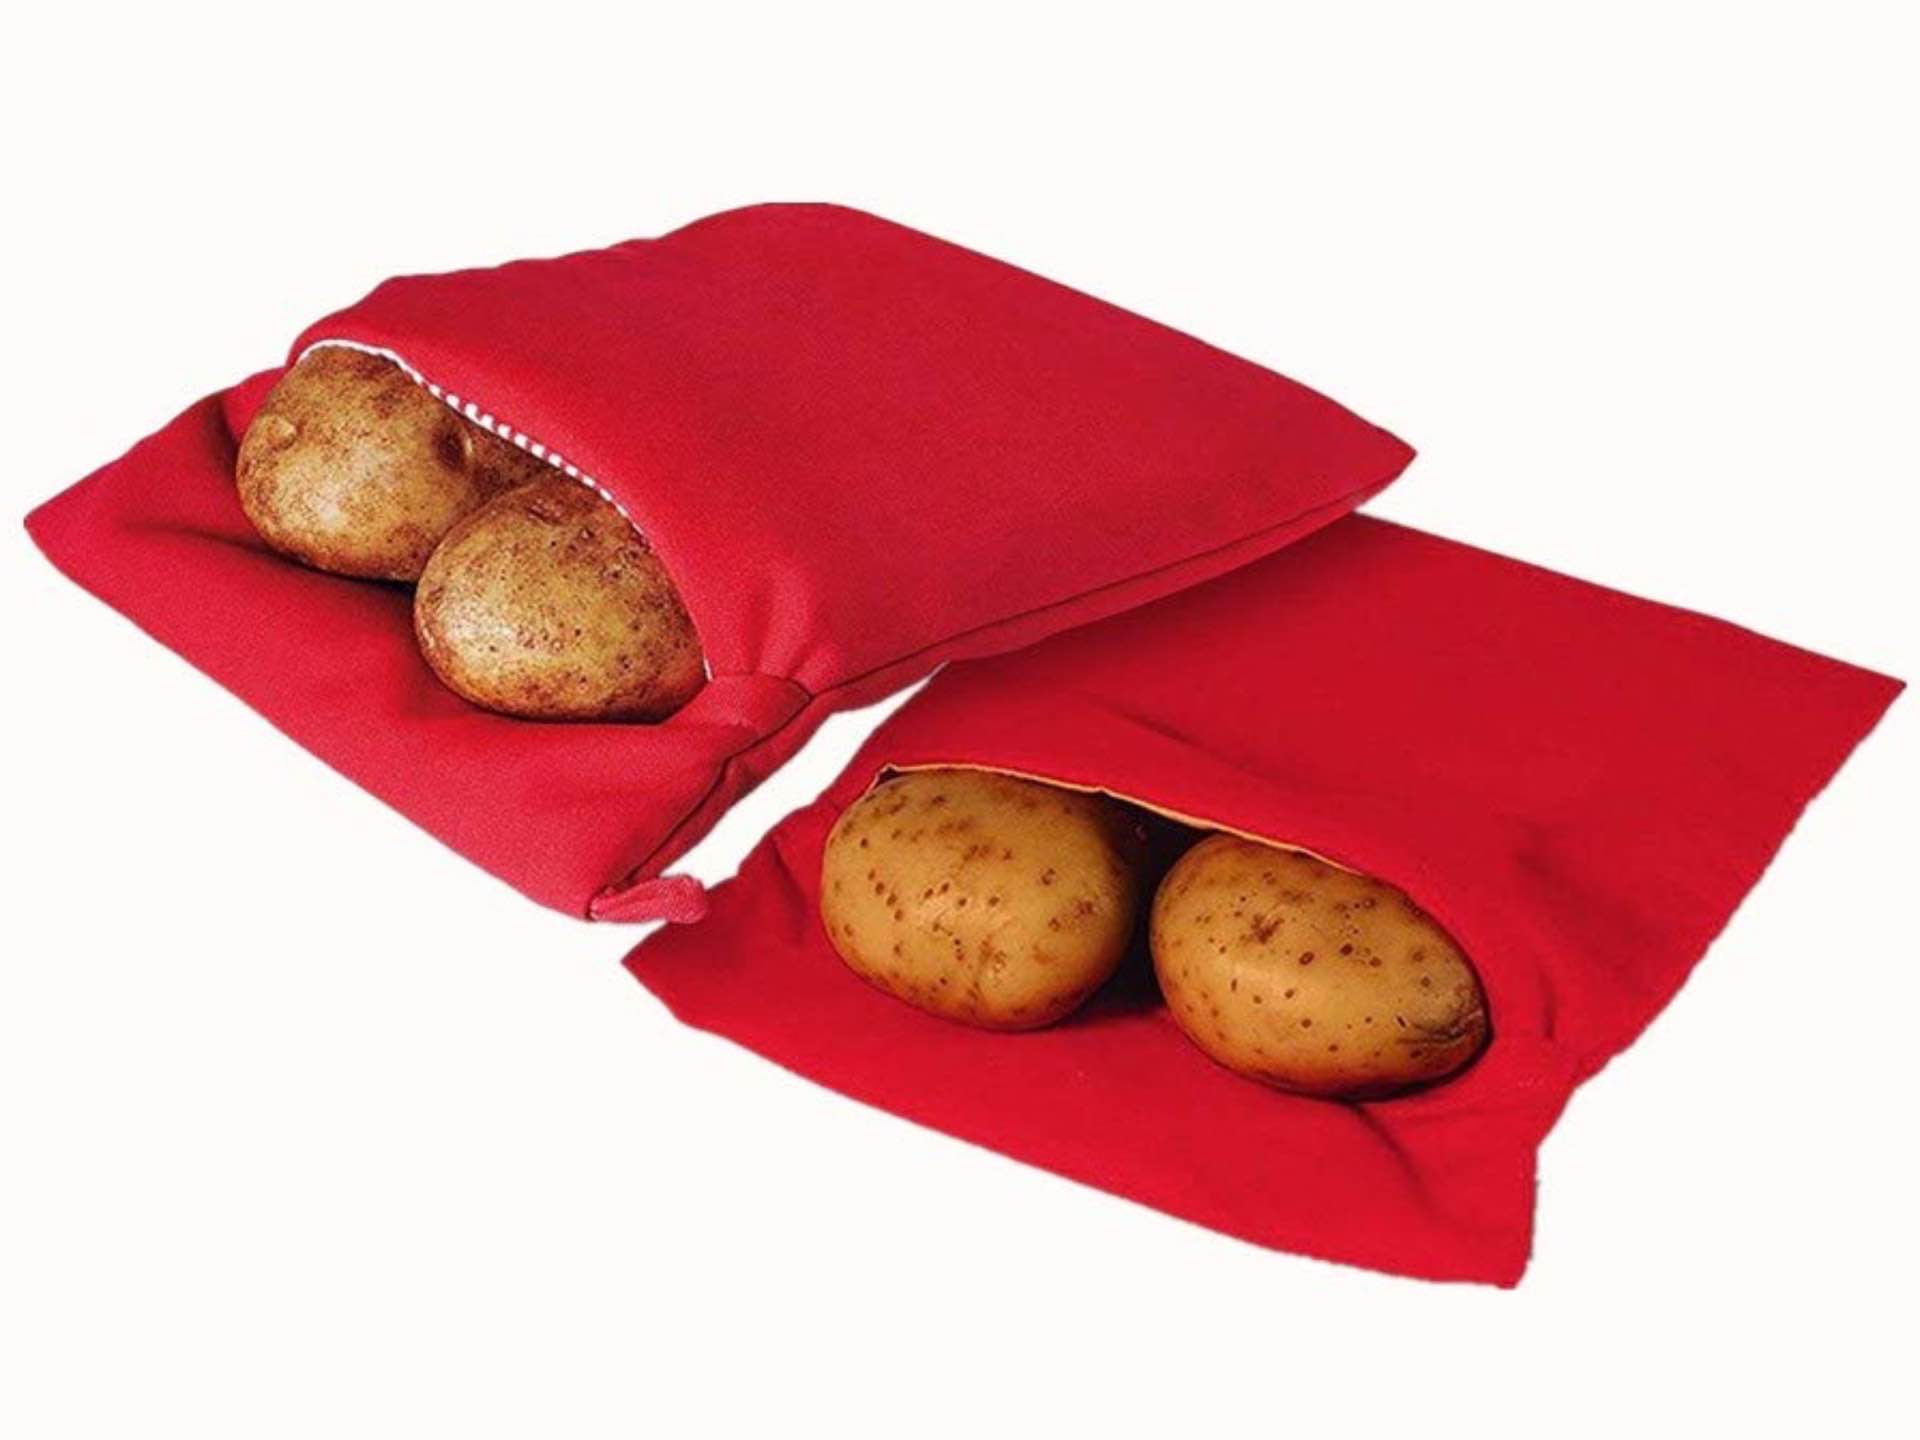 microwave-baked-potato-cooker-pouches